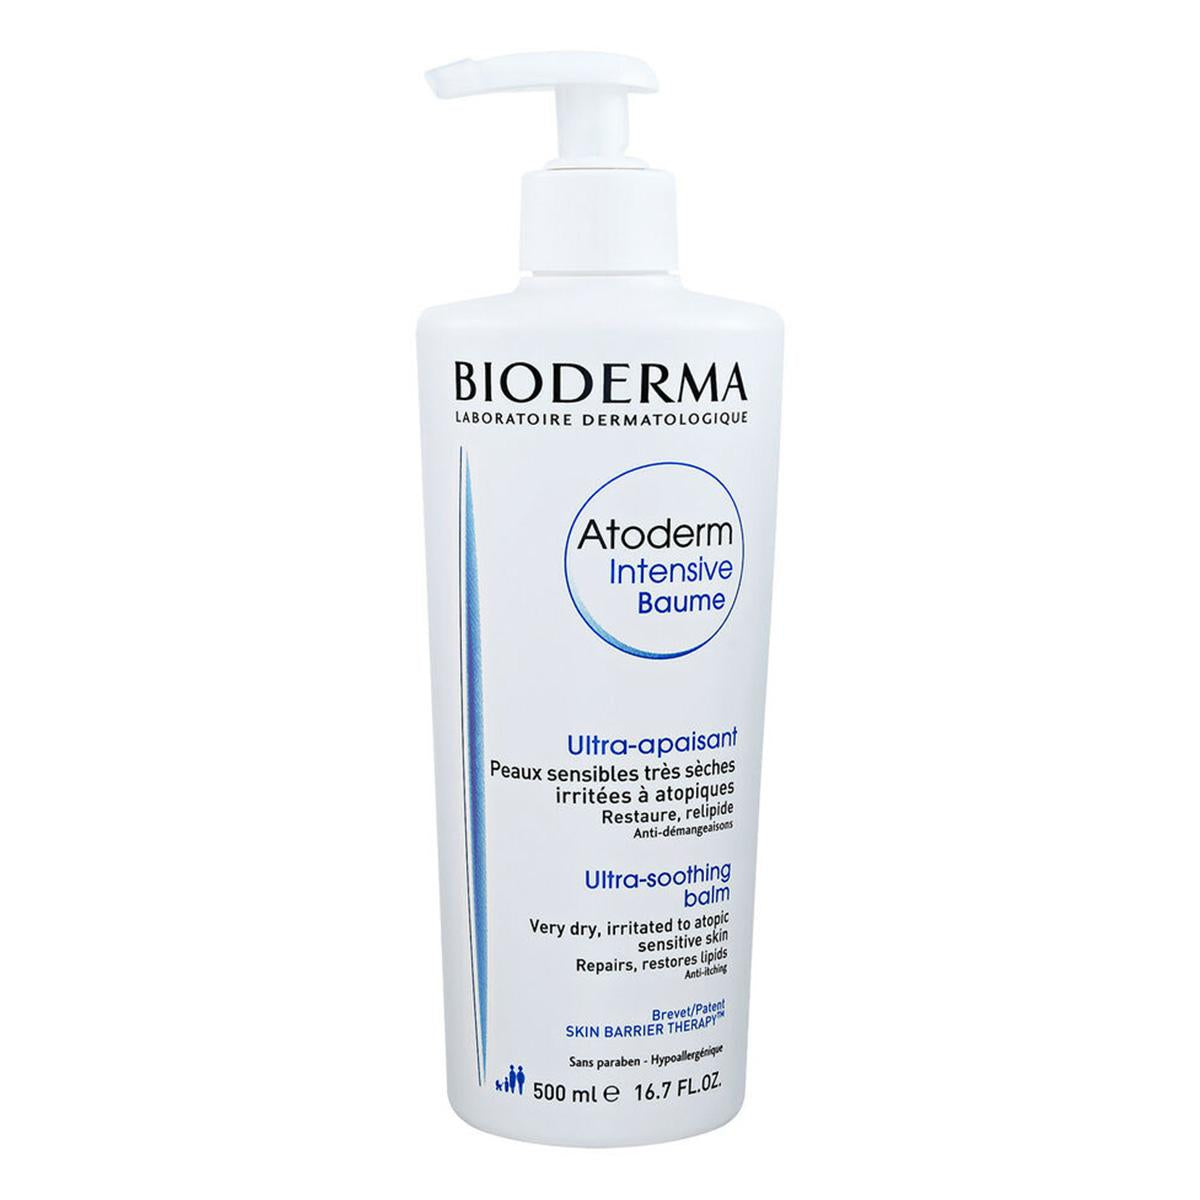 Primary image of Atoderm Intensive Balm